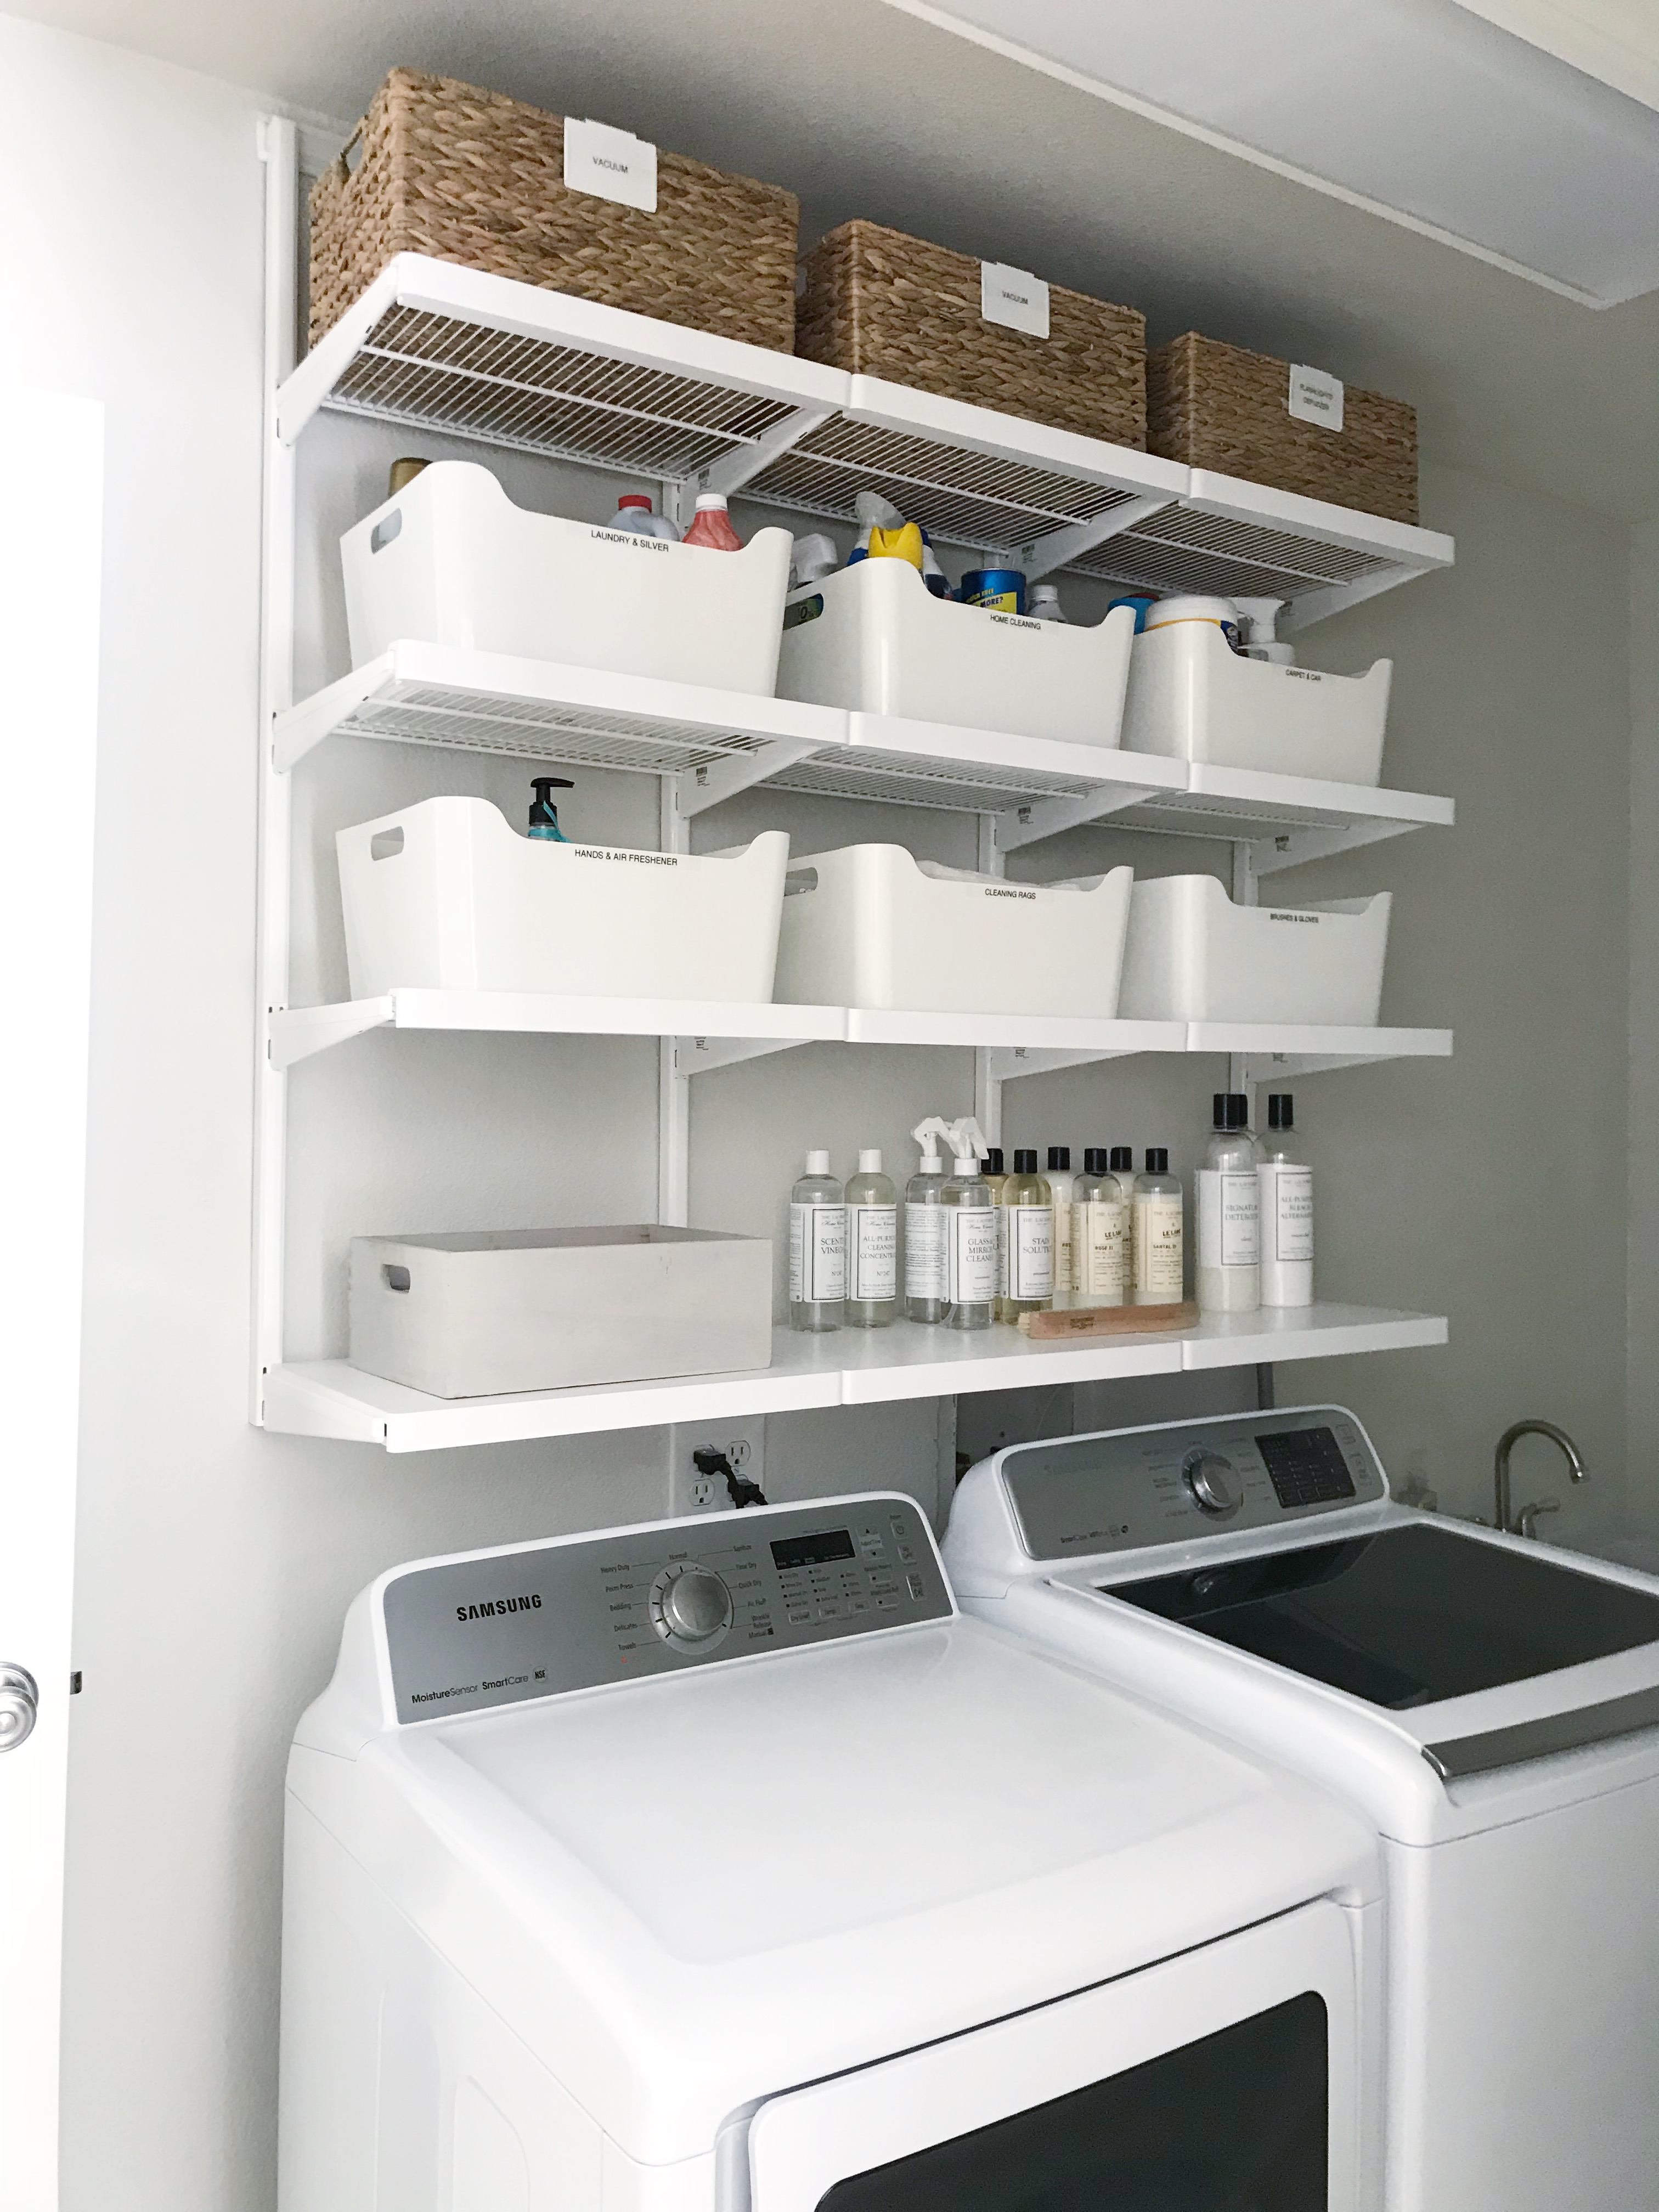 Expandable Laundry Room Shelves With Closet Rod, 64 120 White Wire Wall ...